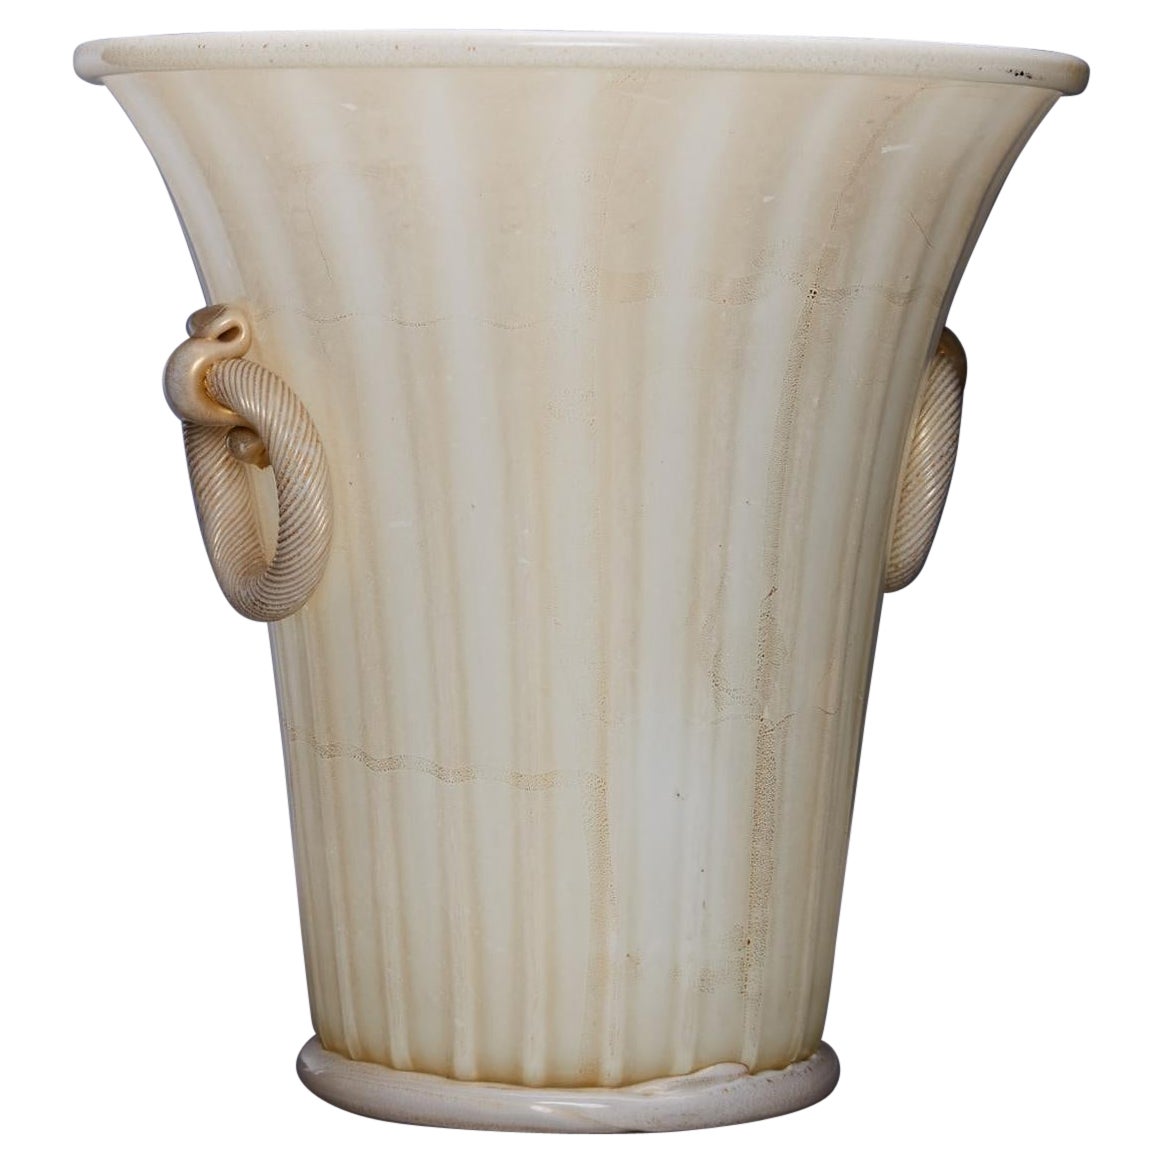 Large Twin-Handled Vase by Ercole Barovier for Barovier and Toso, 1956 For Sale